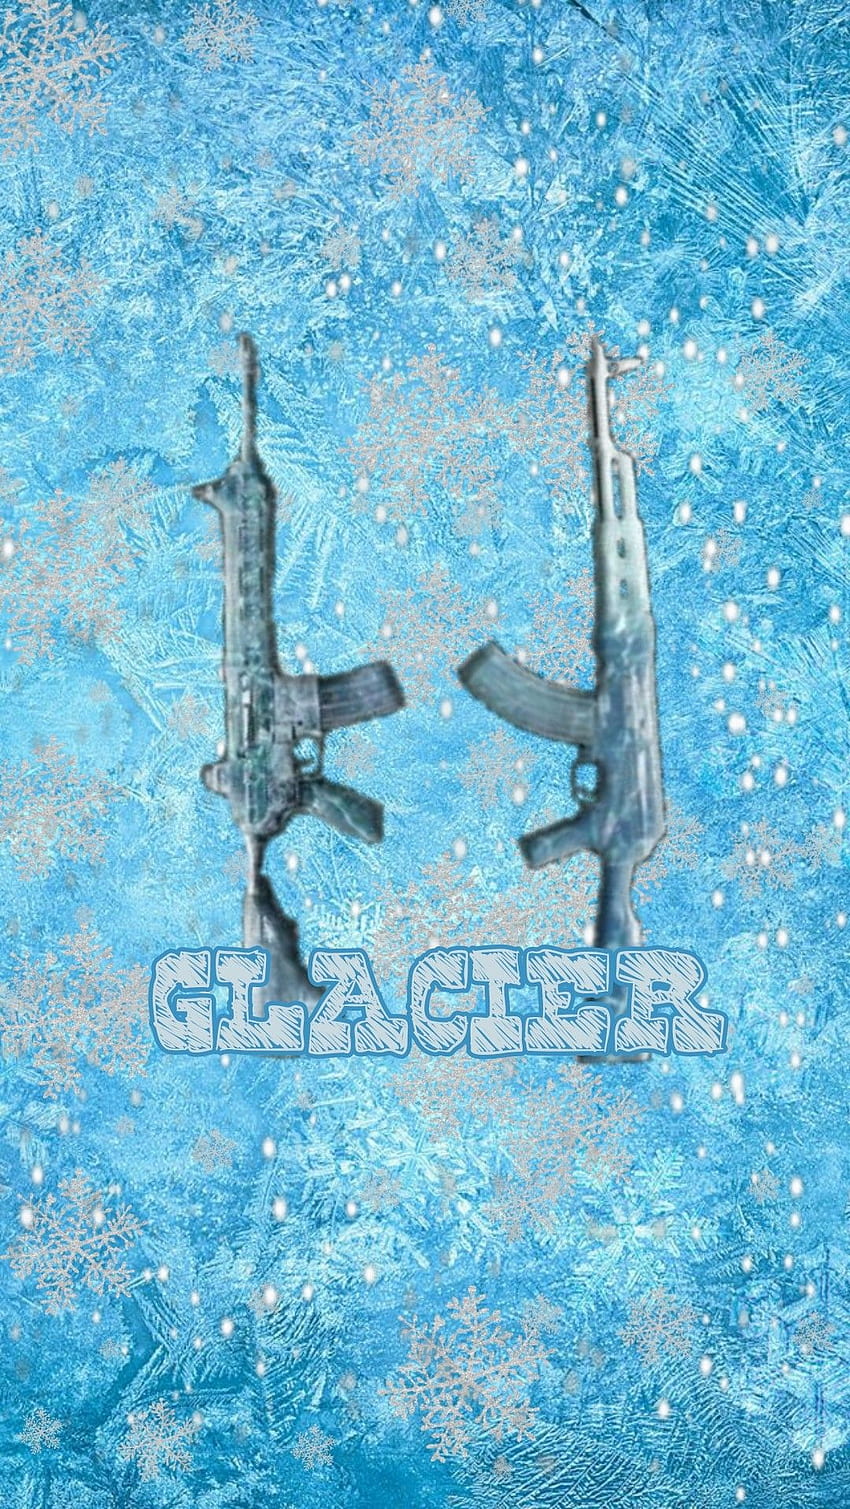 M416 × AKM GLACIER - Best of for Andriod HD phone wallpaper